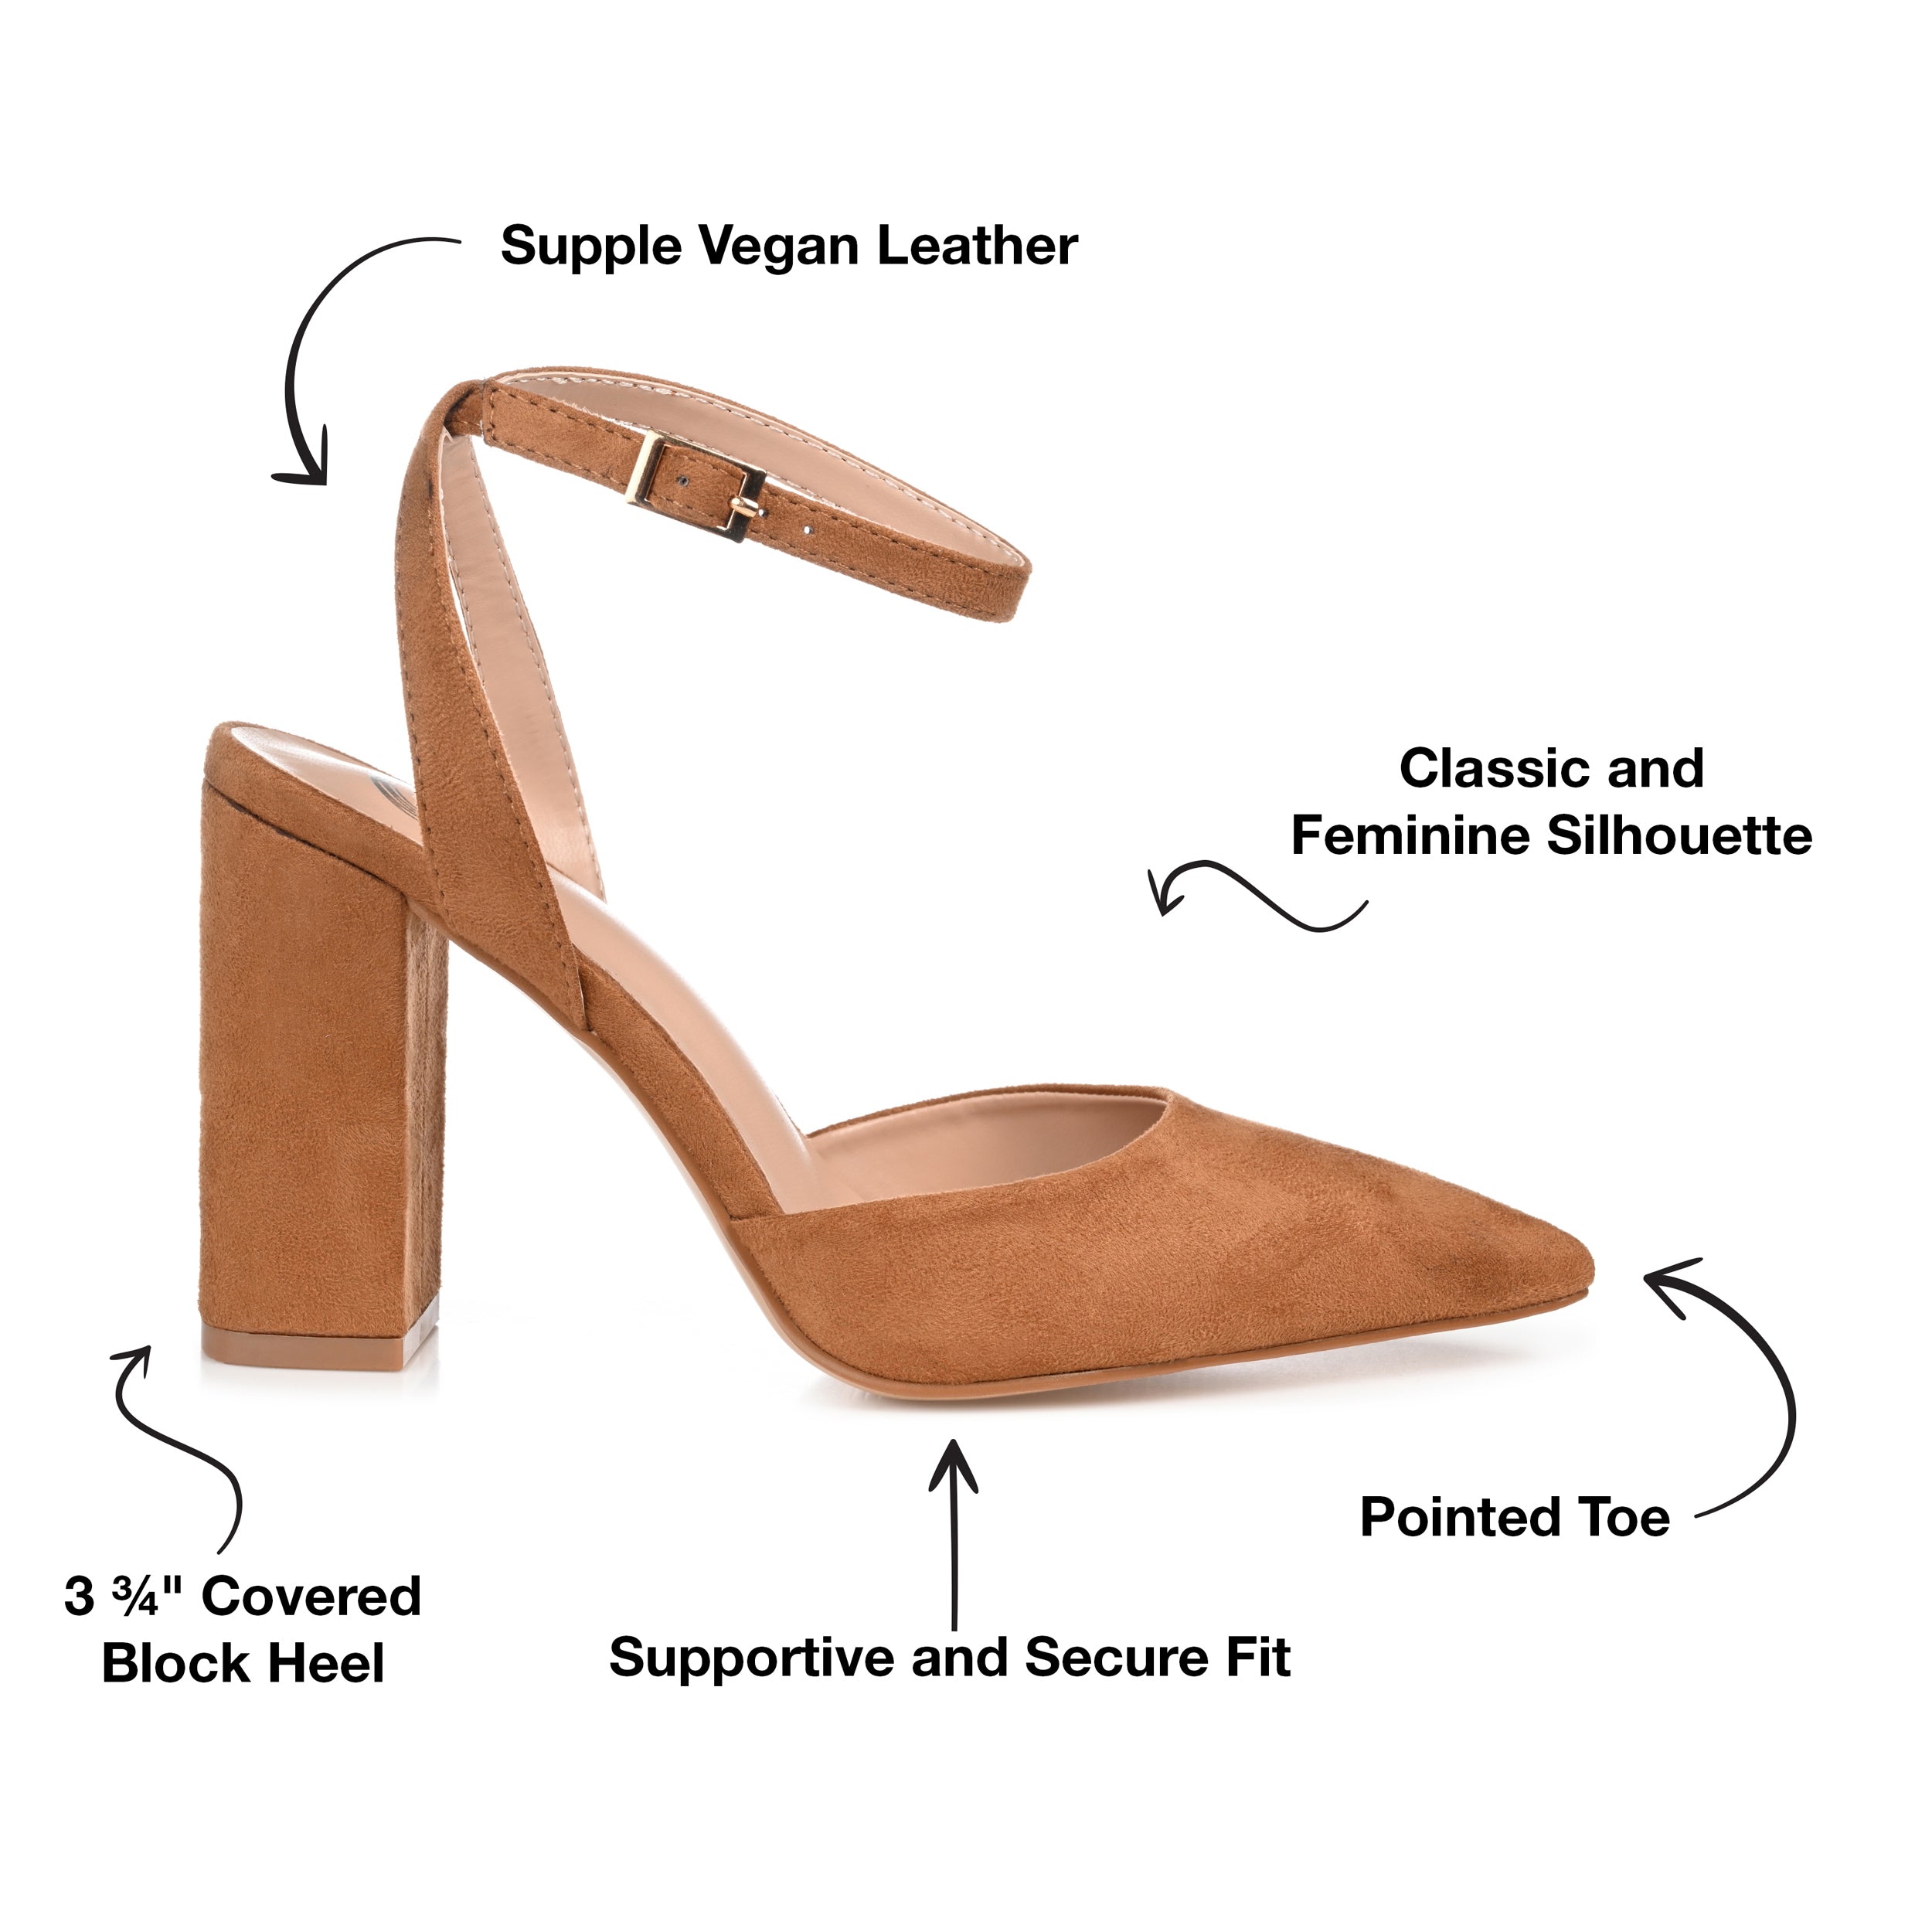 Baggout - Here's your guide for choosing heels for different occasions ✨ .  . #shoes #fashion #style #sneakers #love #shopping #moda #nike #instagood  #like #shoesaddict #heels #follow #outfit #dress #onlineshopping #ootd  #instagram #